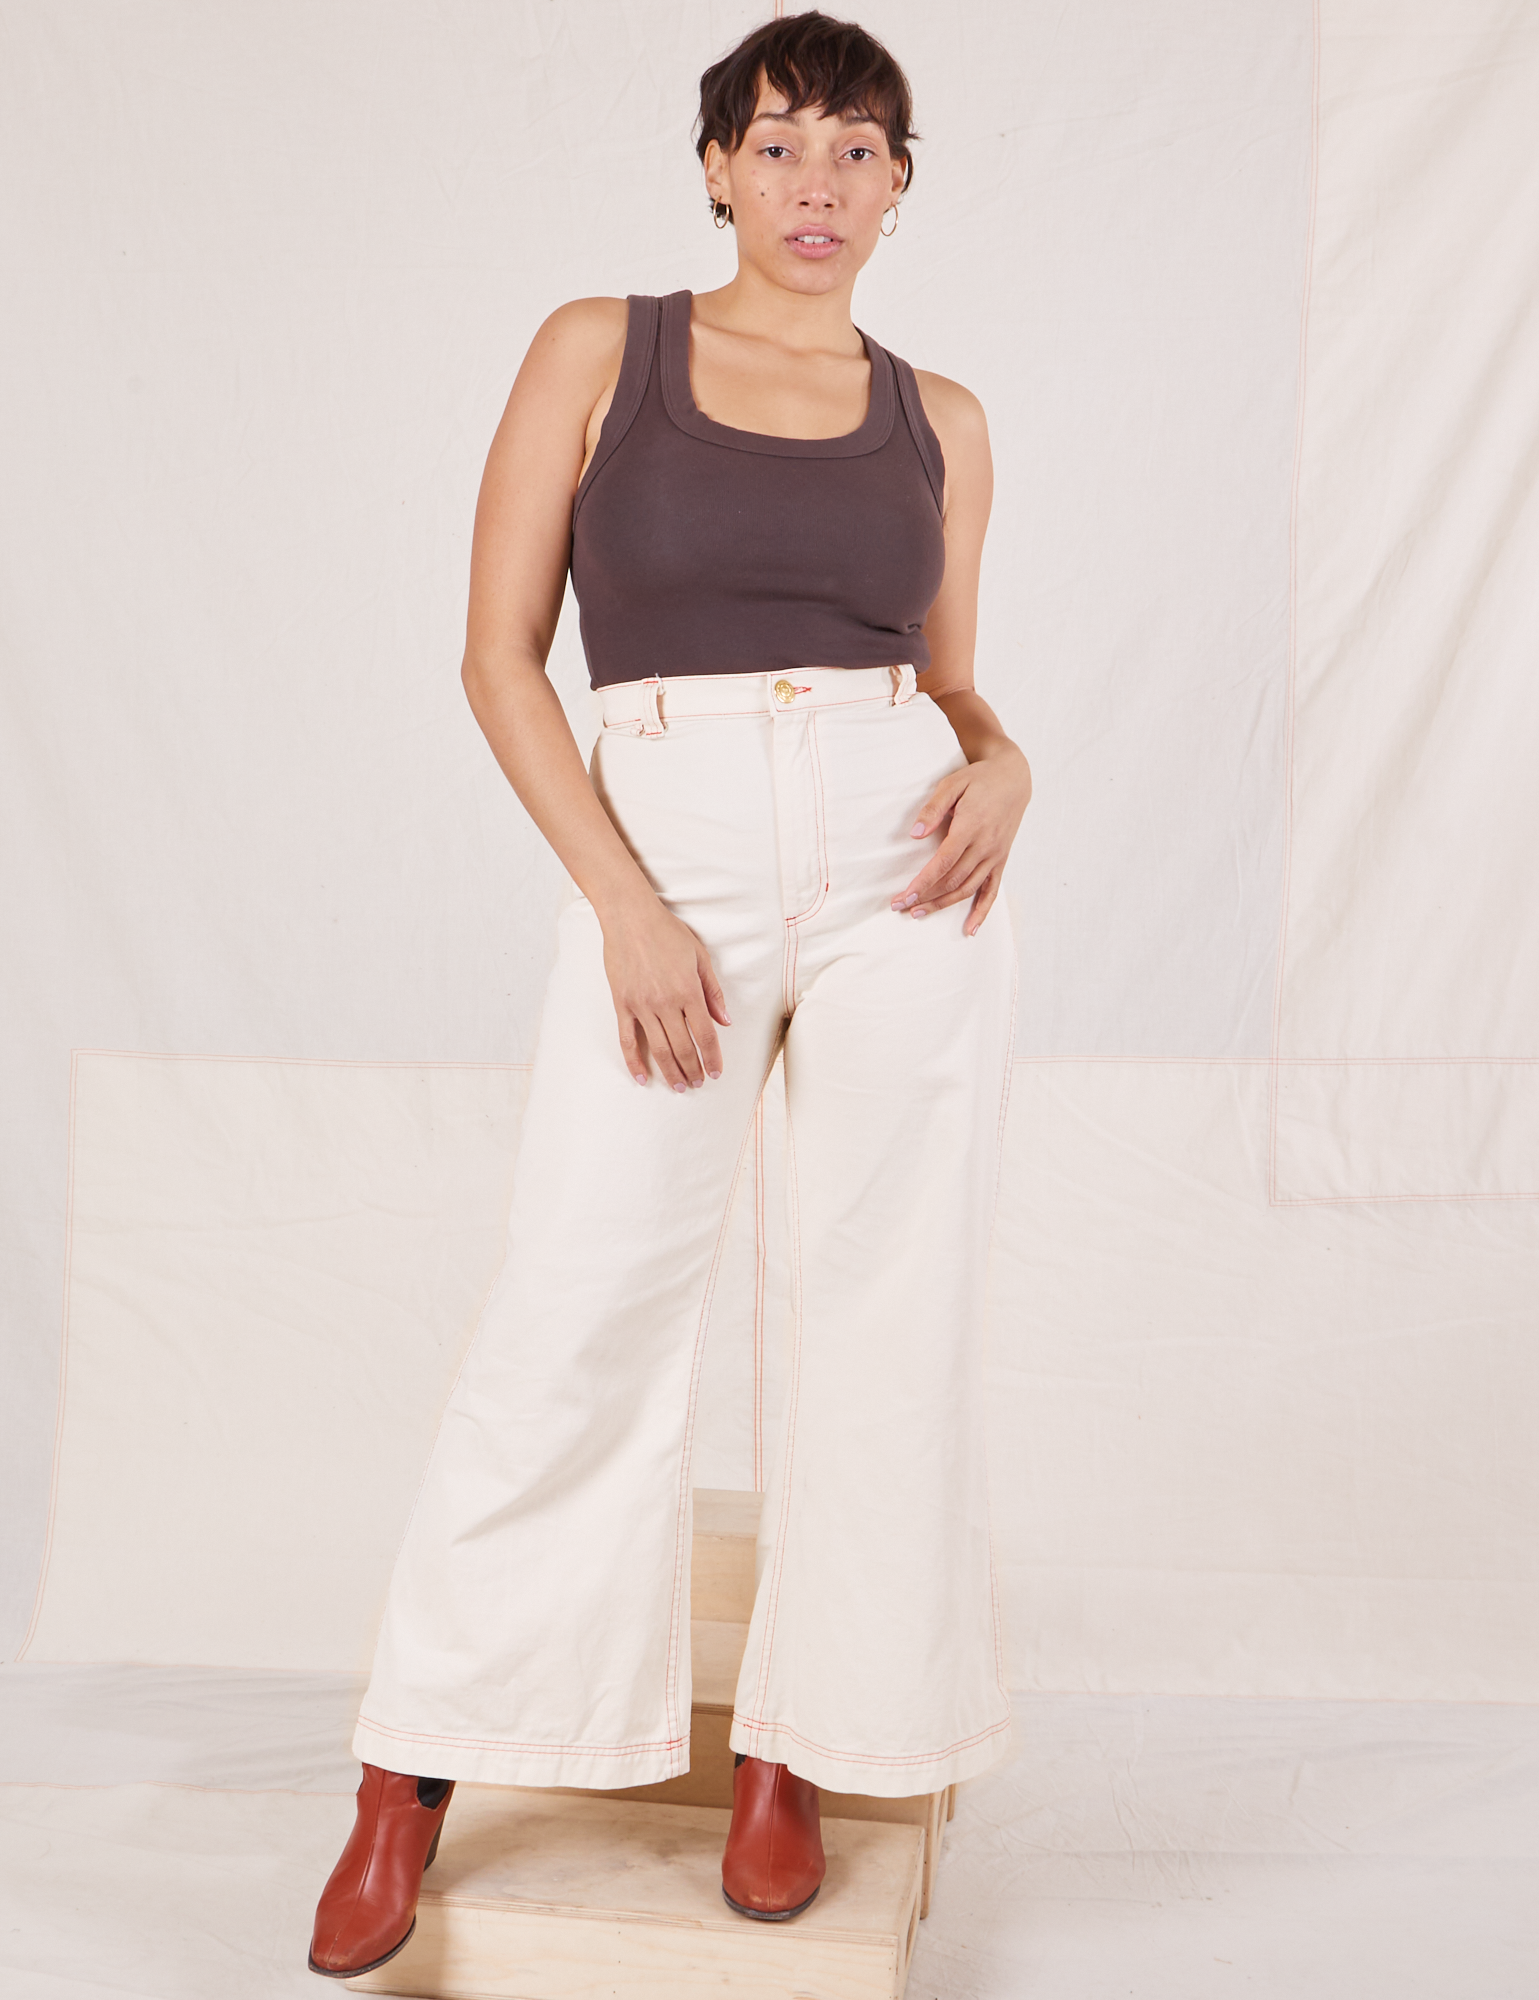 White Bell Bottoms Pants for Women, Flared Pants Women, White High Waist  Trousers for Women -  Canada